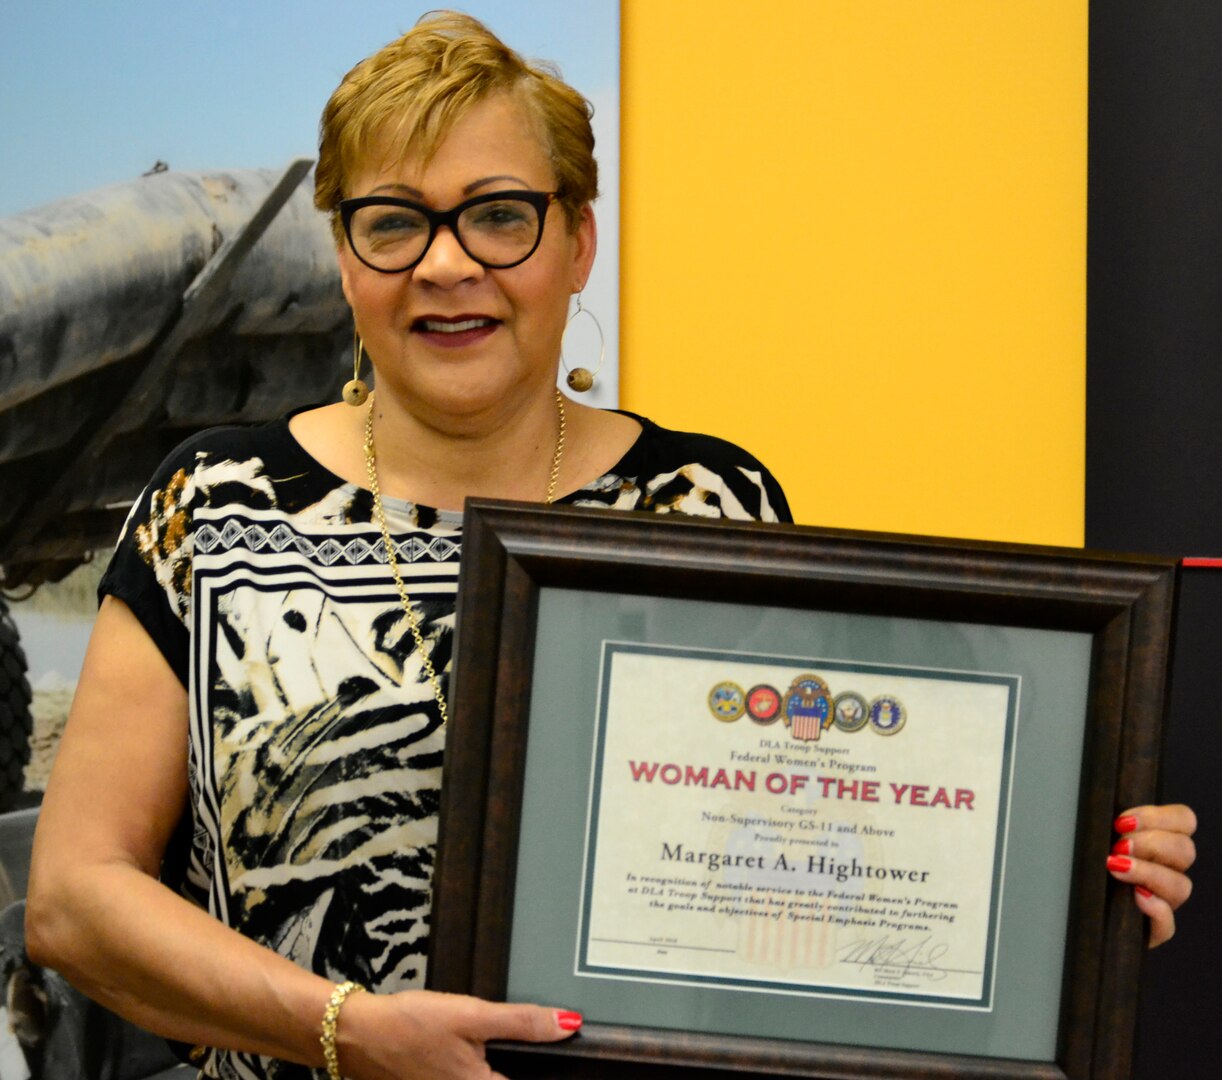 Margaret Hightower, a Construction and Equipment lead resolution specialist, poses with her award at DLA Troop Support, April 24, 2018 in Philadelphia.